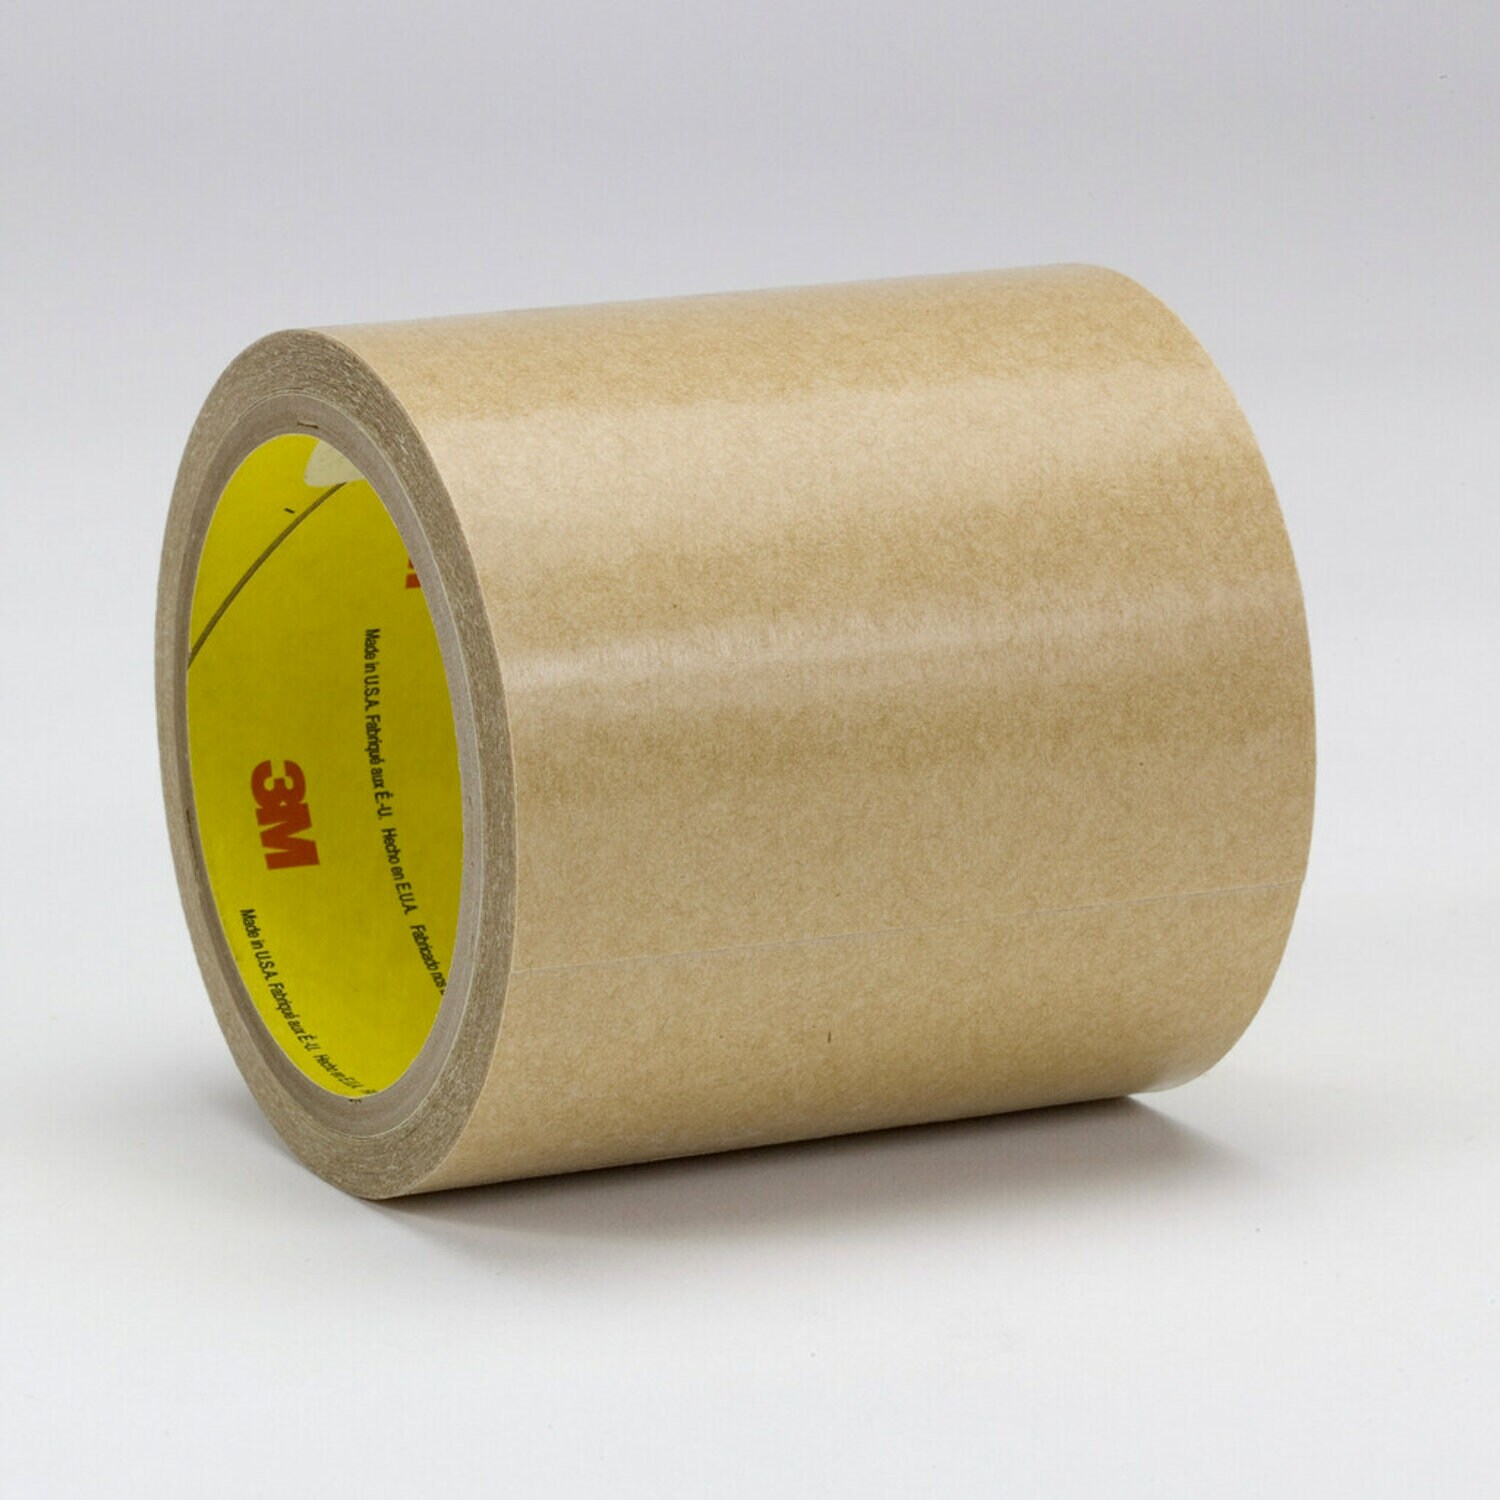 7000028898 - 3M Adhesive Transfer Tape 9672, Clear, 24 in x 60 yd, 5 mil, 1 roll per
case